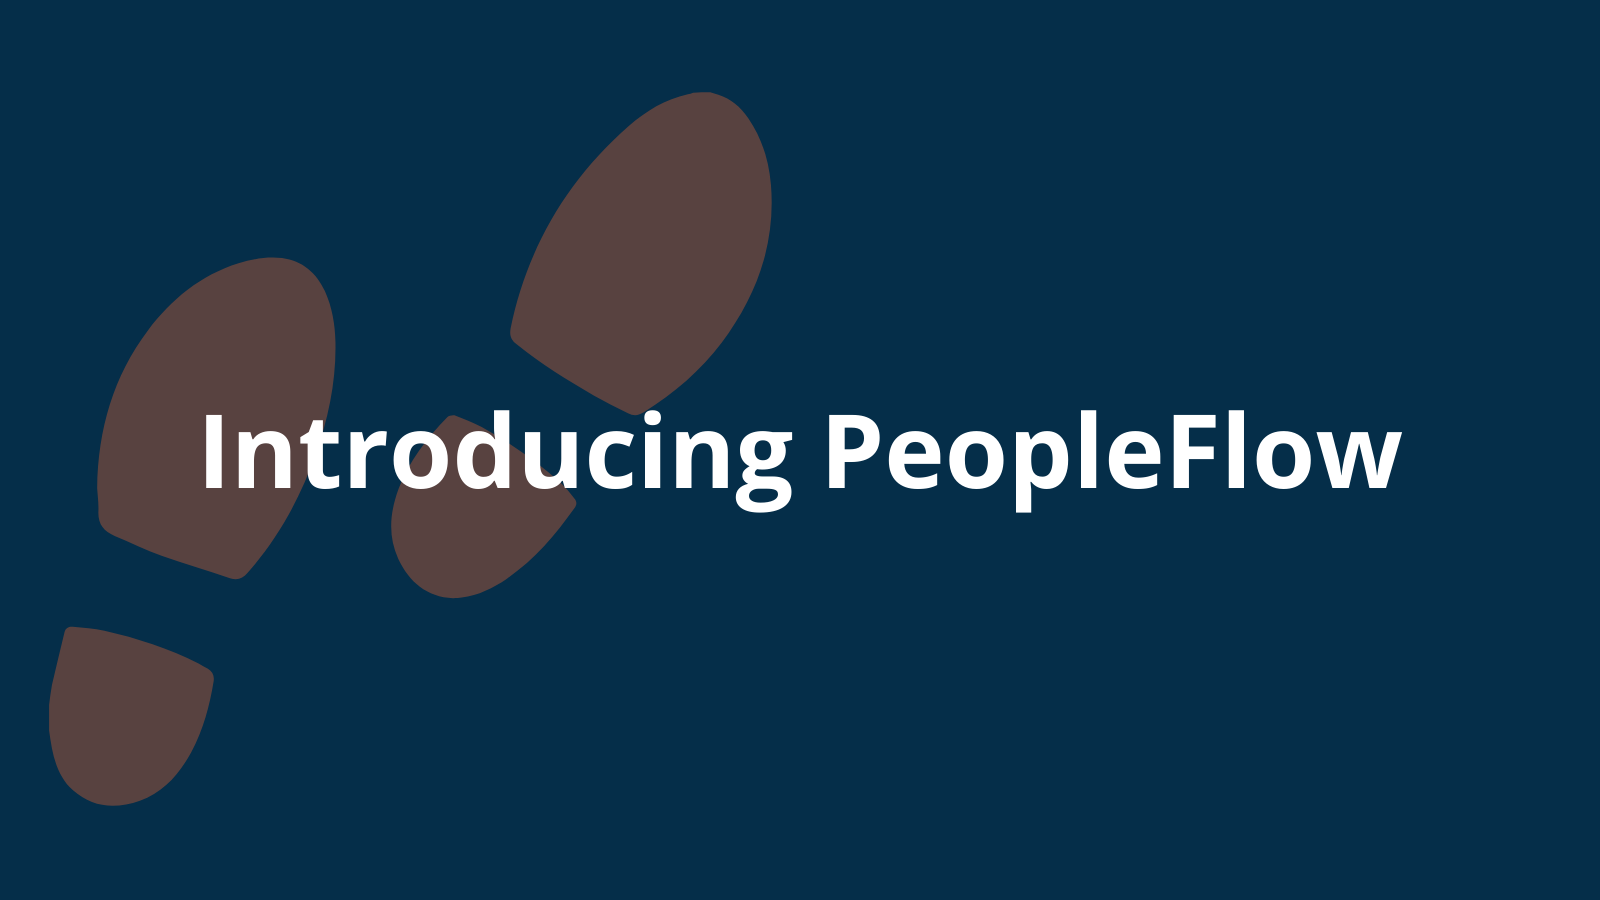 Introducing PeopleFlow cover photo, words over two orange shoeprints on navy background